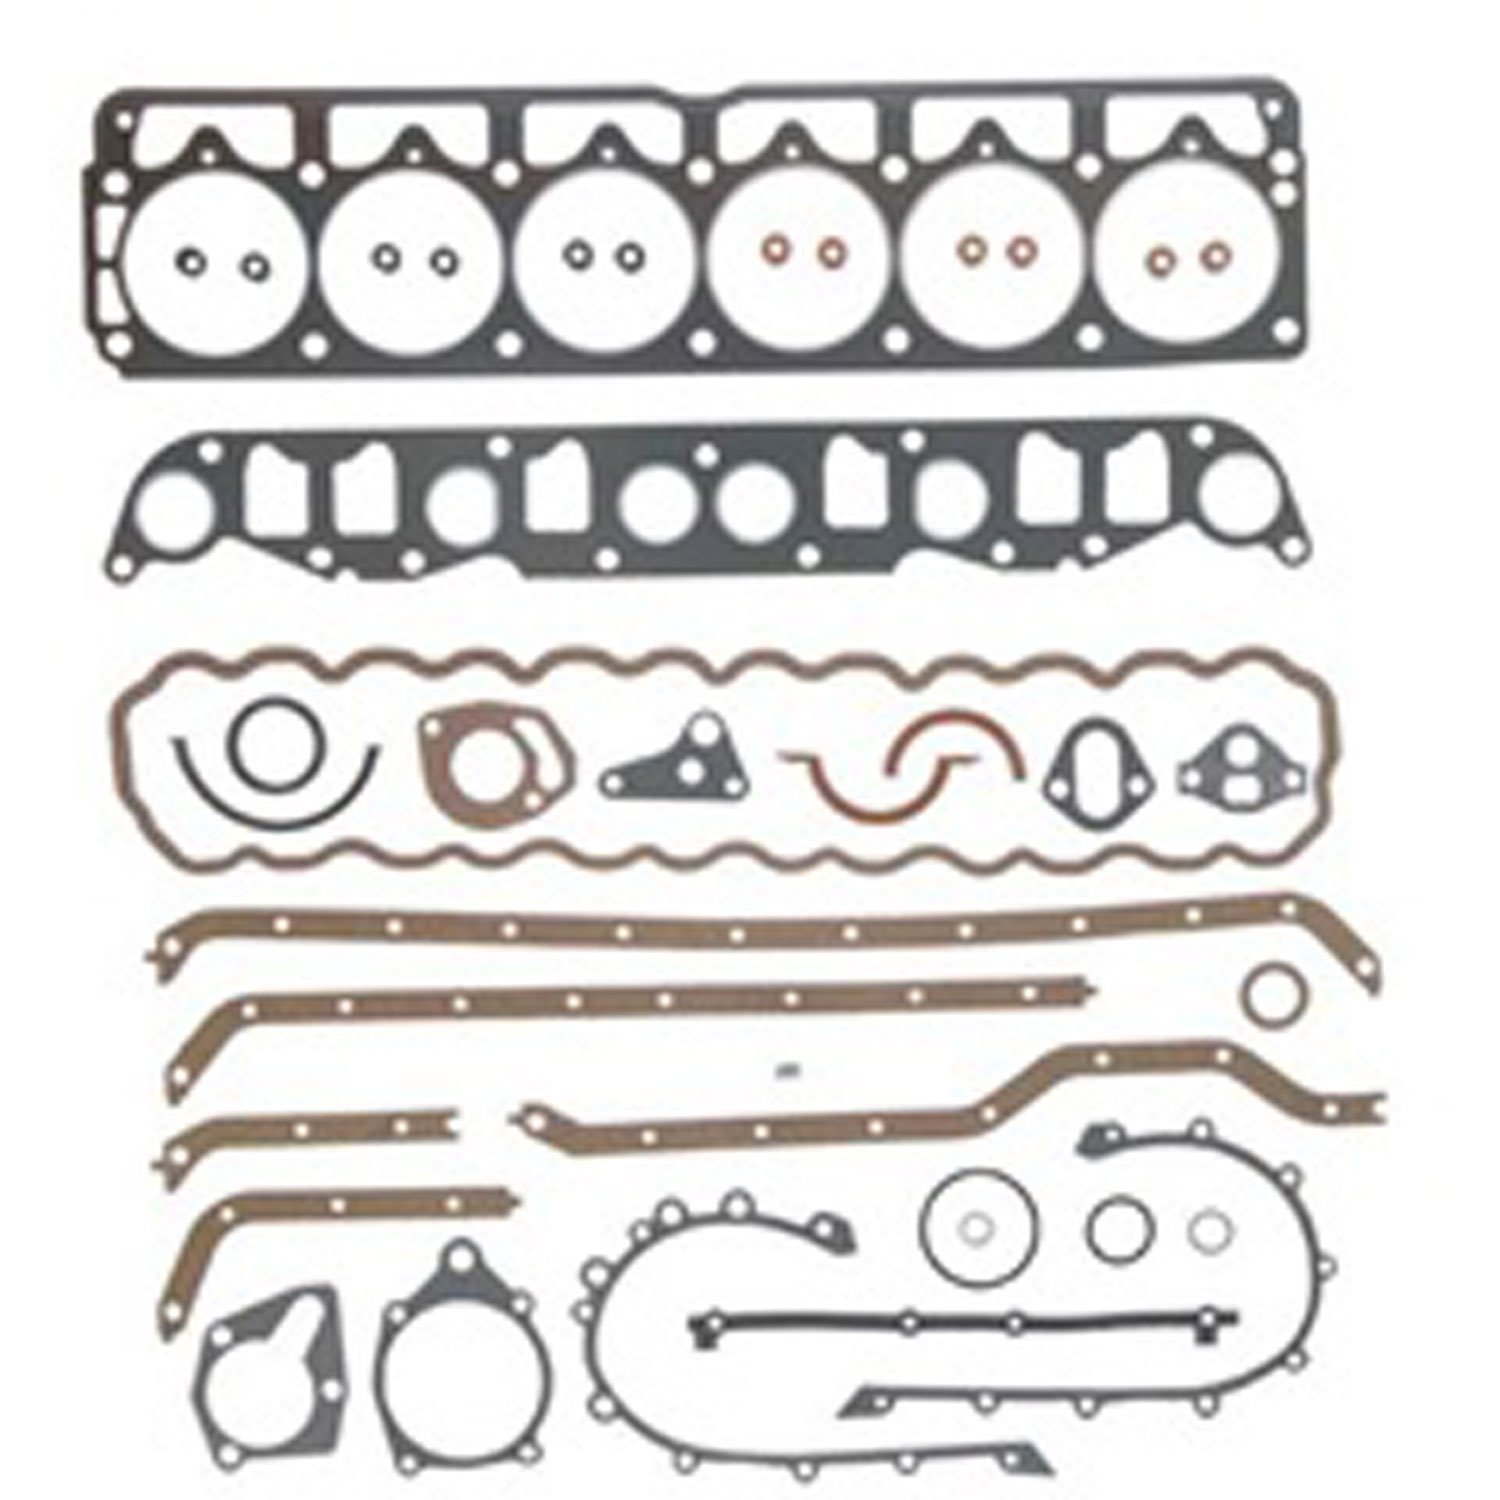 This full engine gasket set from Omix-ADA fits